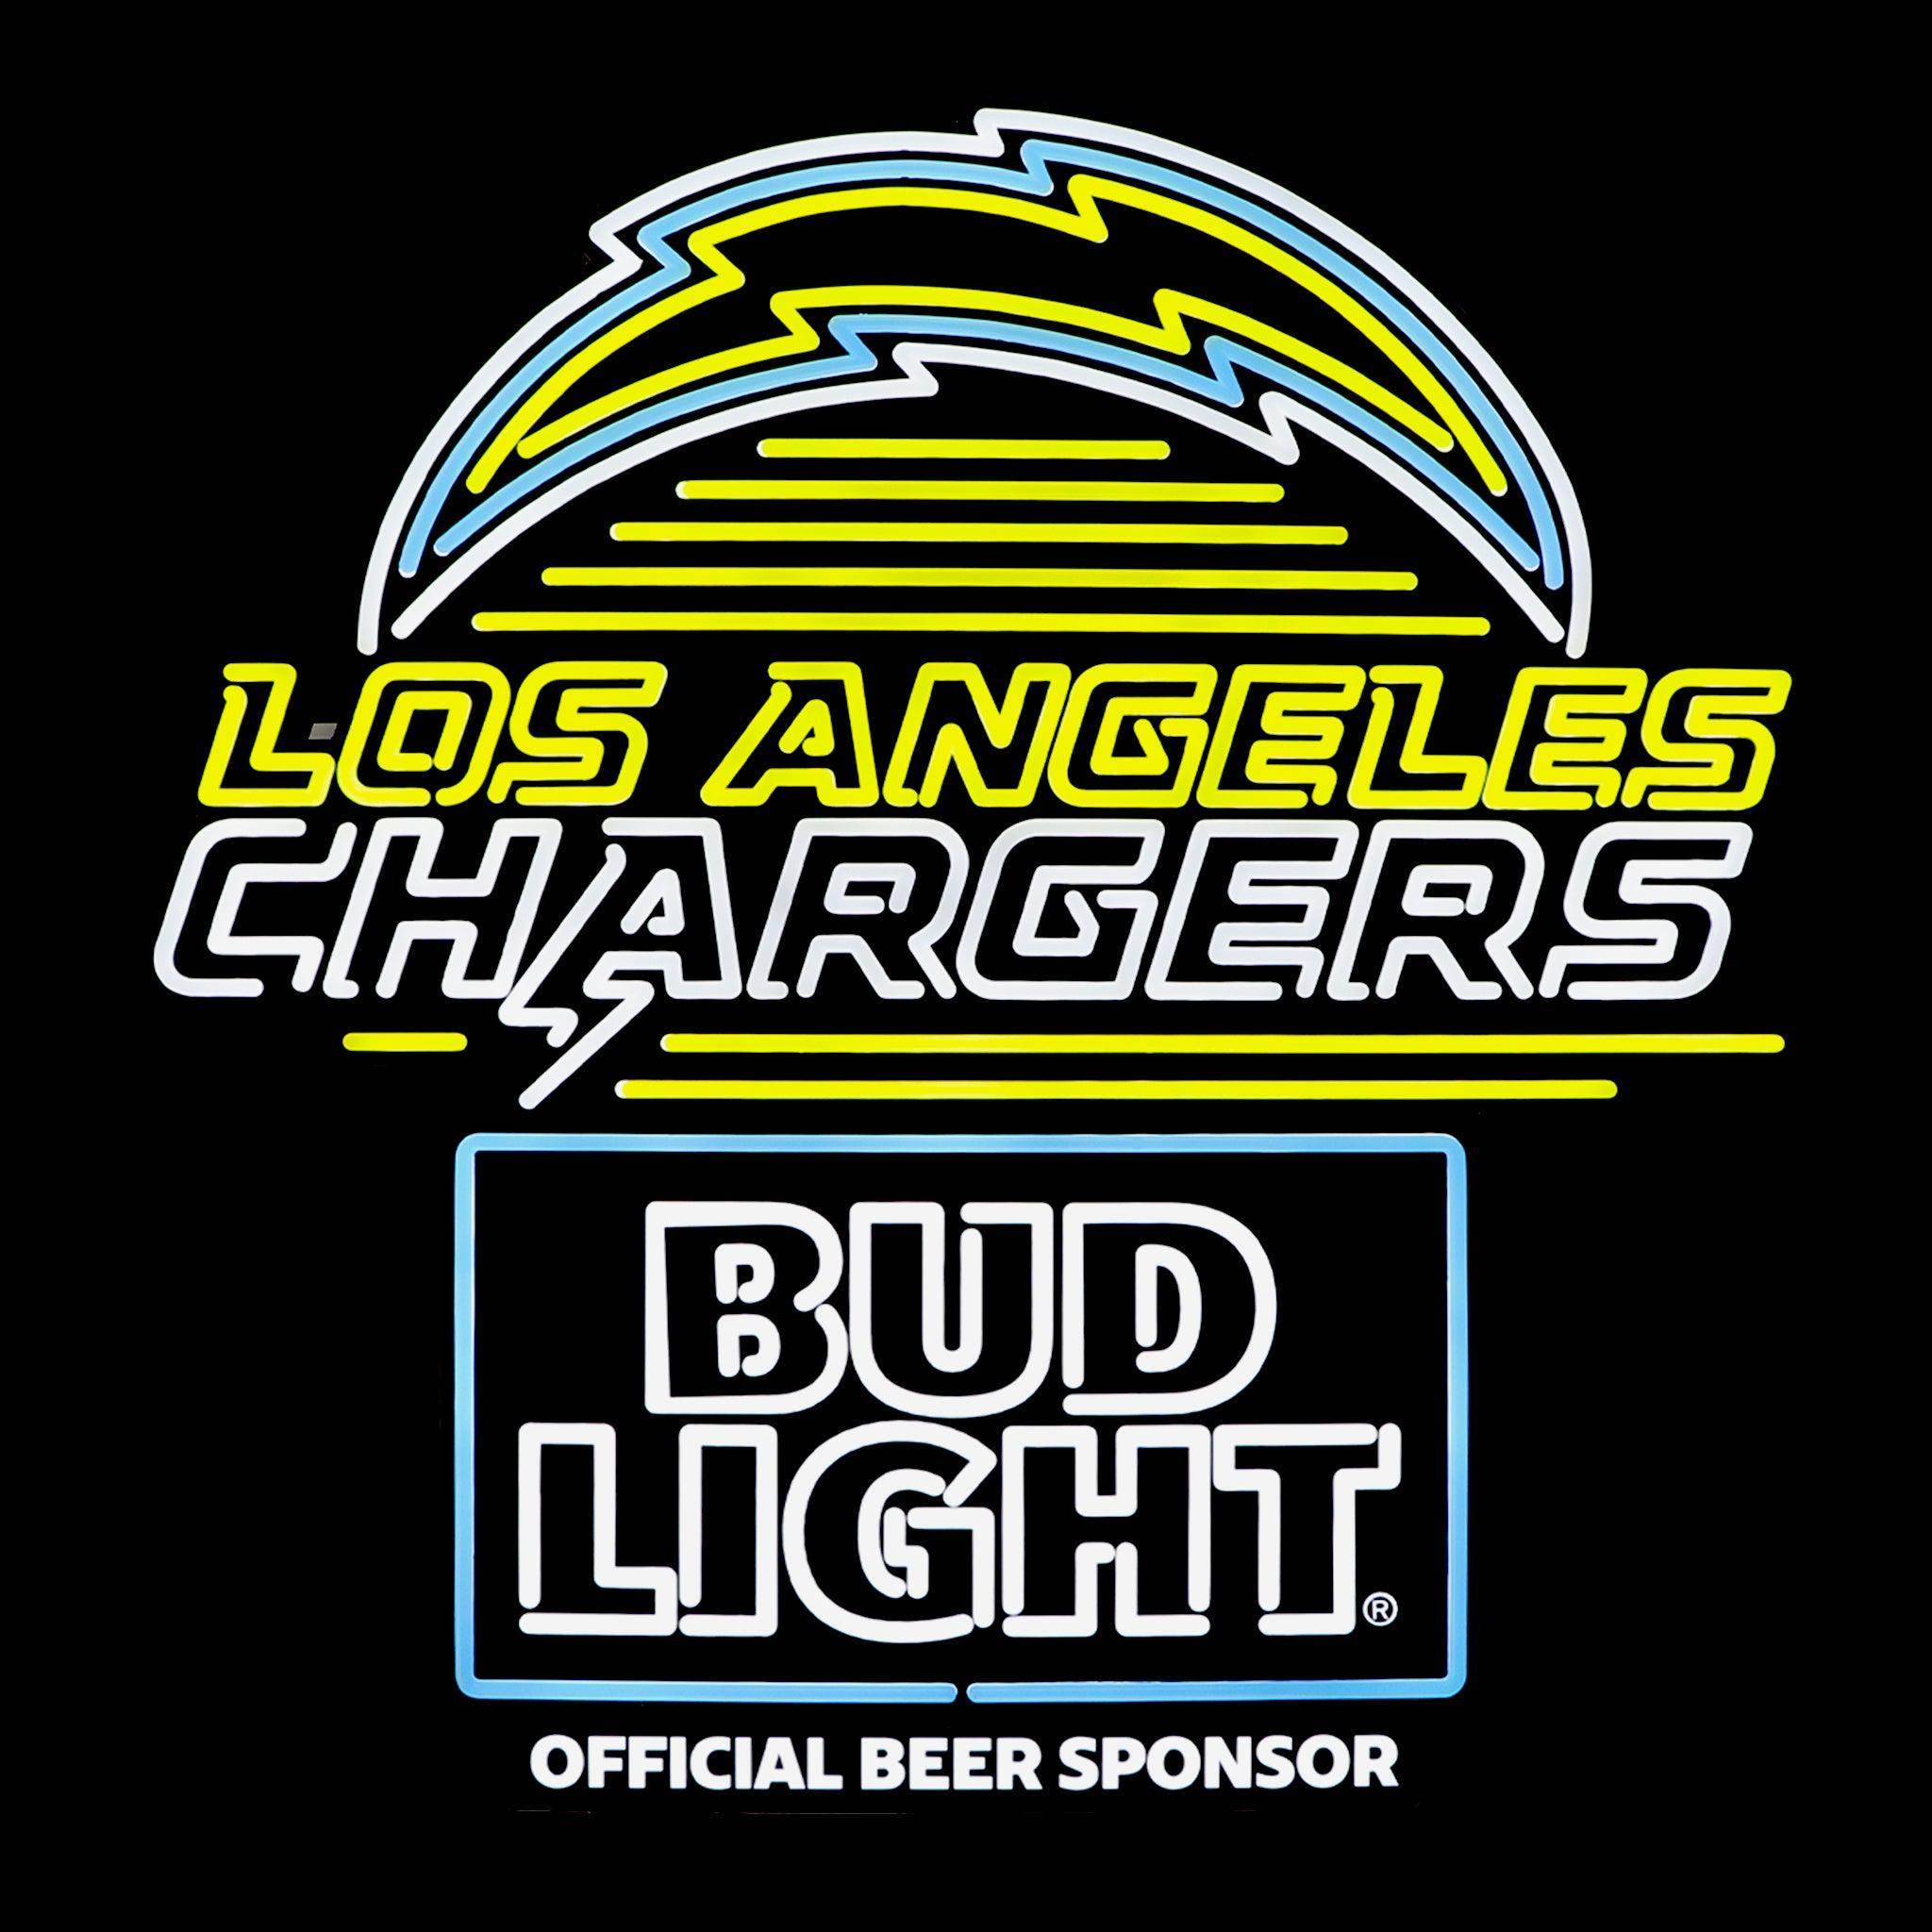 Los Angeles Chargers added a new photo. - Los Angeles Chargers